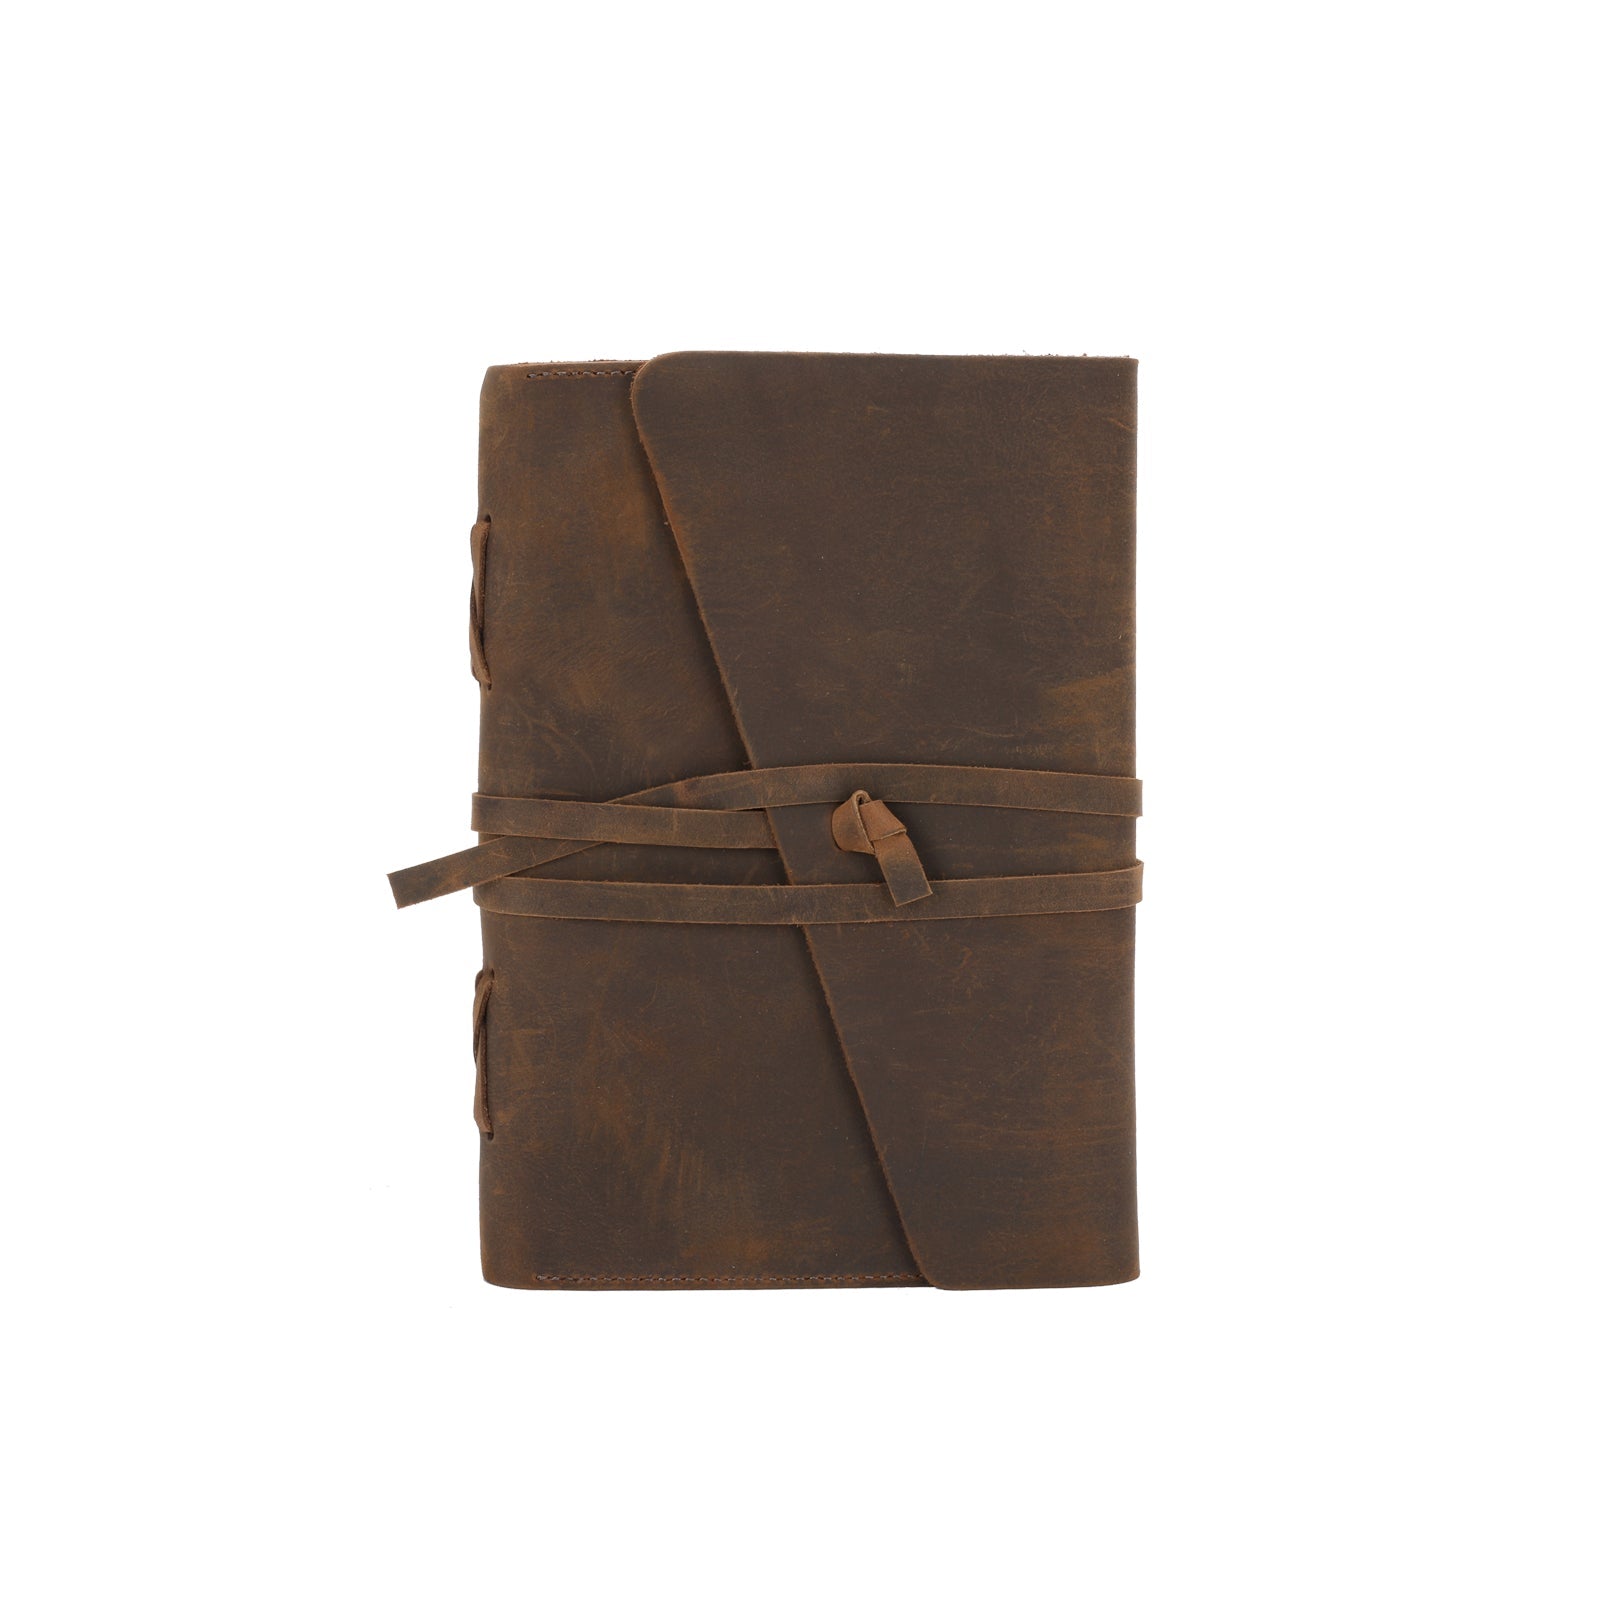 Montana West Western Vintage Genuine Leather Journal Notebook Handheld Size 6.5" x 9.25" (120 Sheets/240 Pages) - Cowgirl Wear